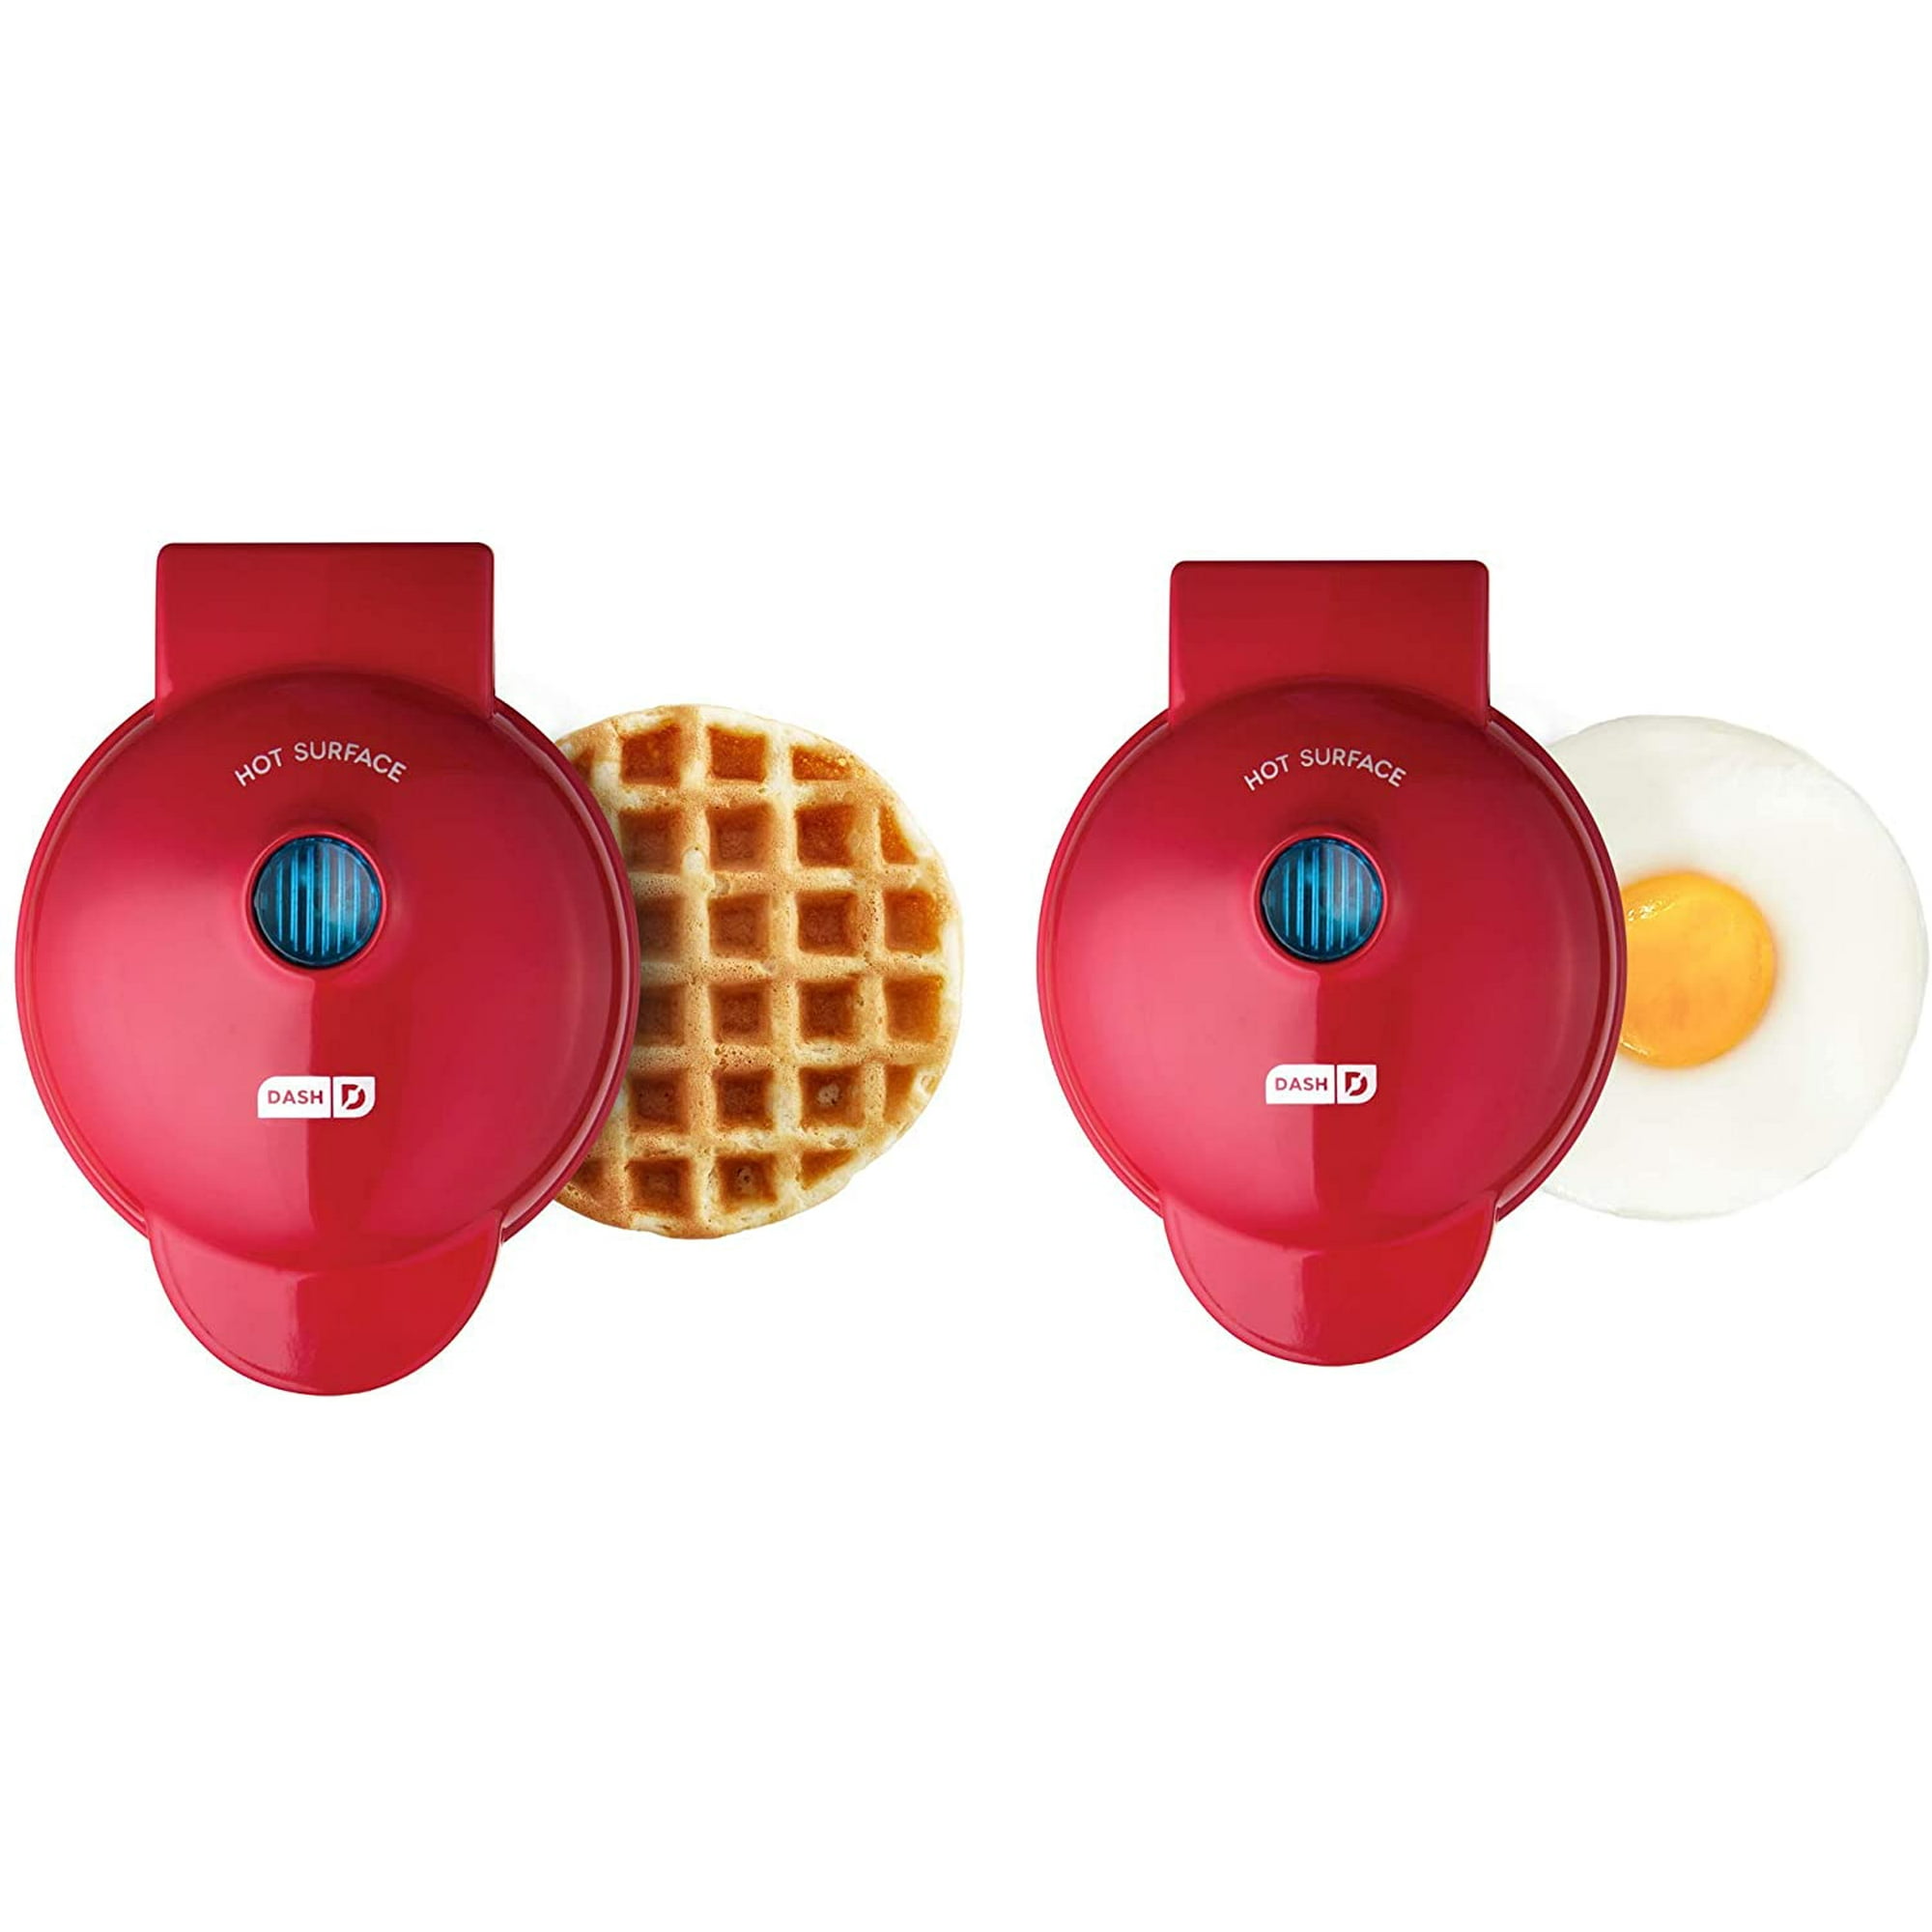 Dash DMSW002RD Mini Maker Grill, Griddle + Waffle Iron, 2 pack, Red |  Walmart Canada